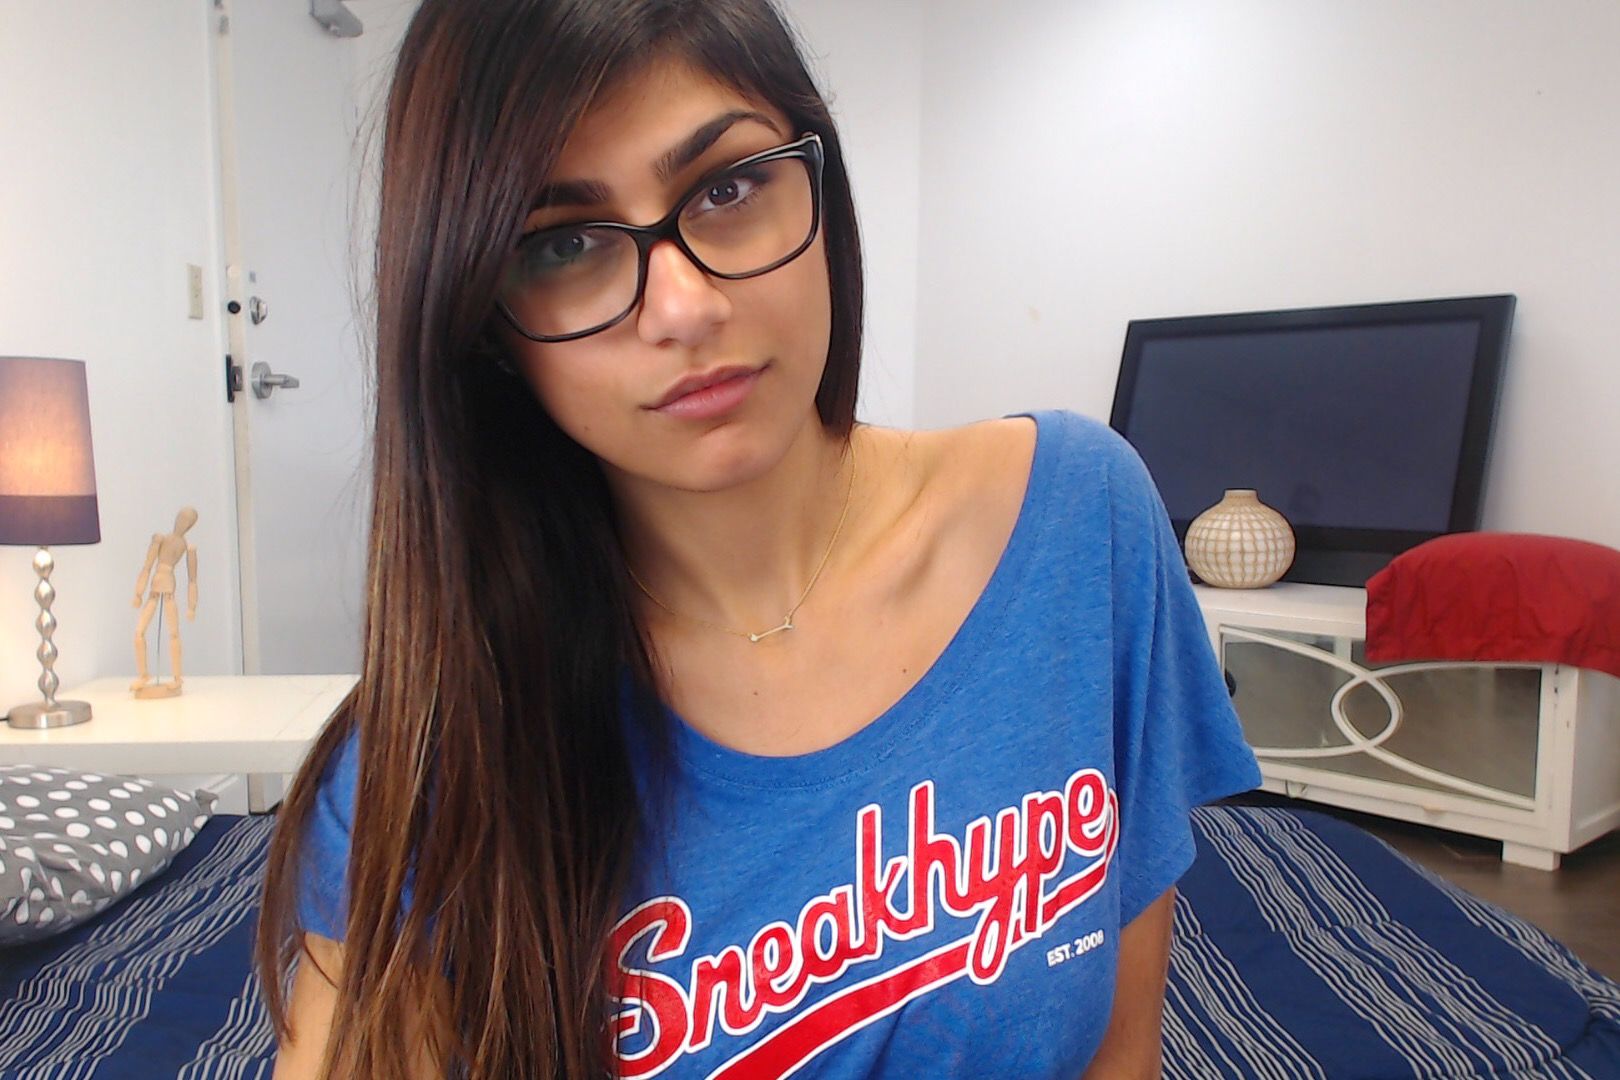 1620px x 1080px - Where will you be able to watch Mia Khalifa's XXX content now? â€“ Film Daily